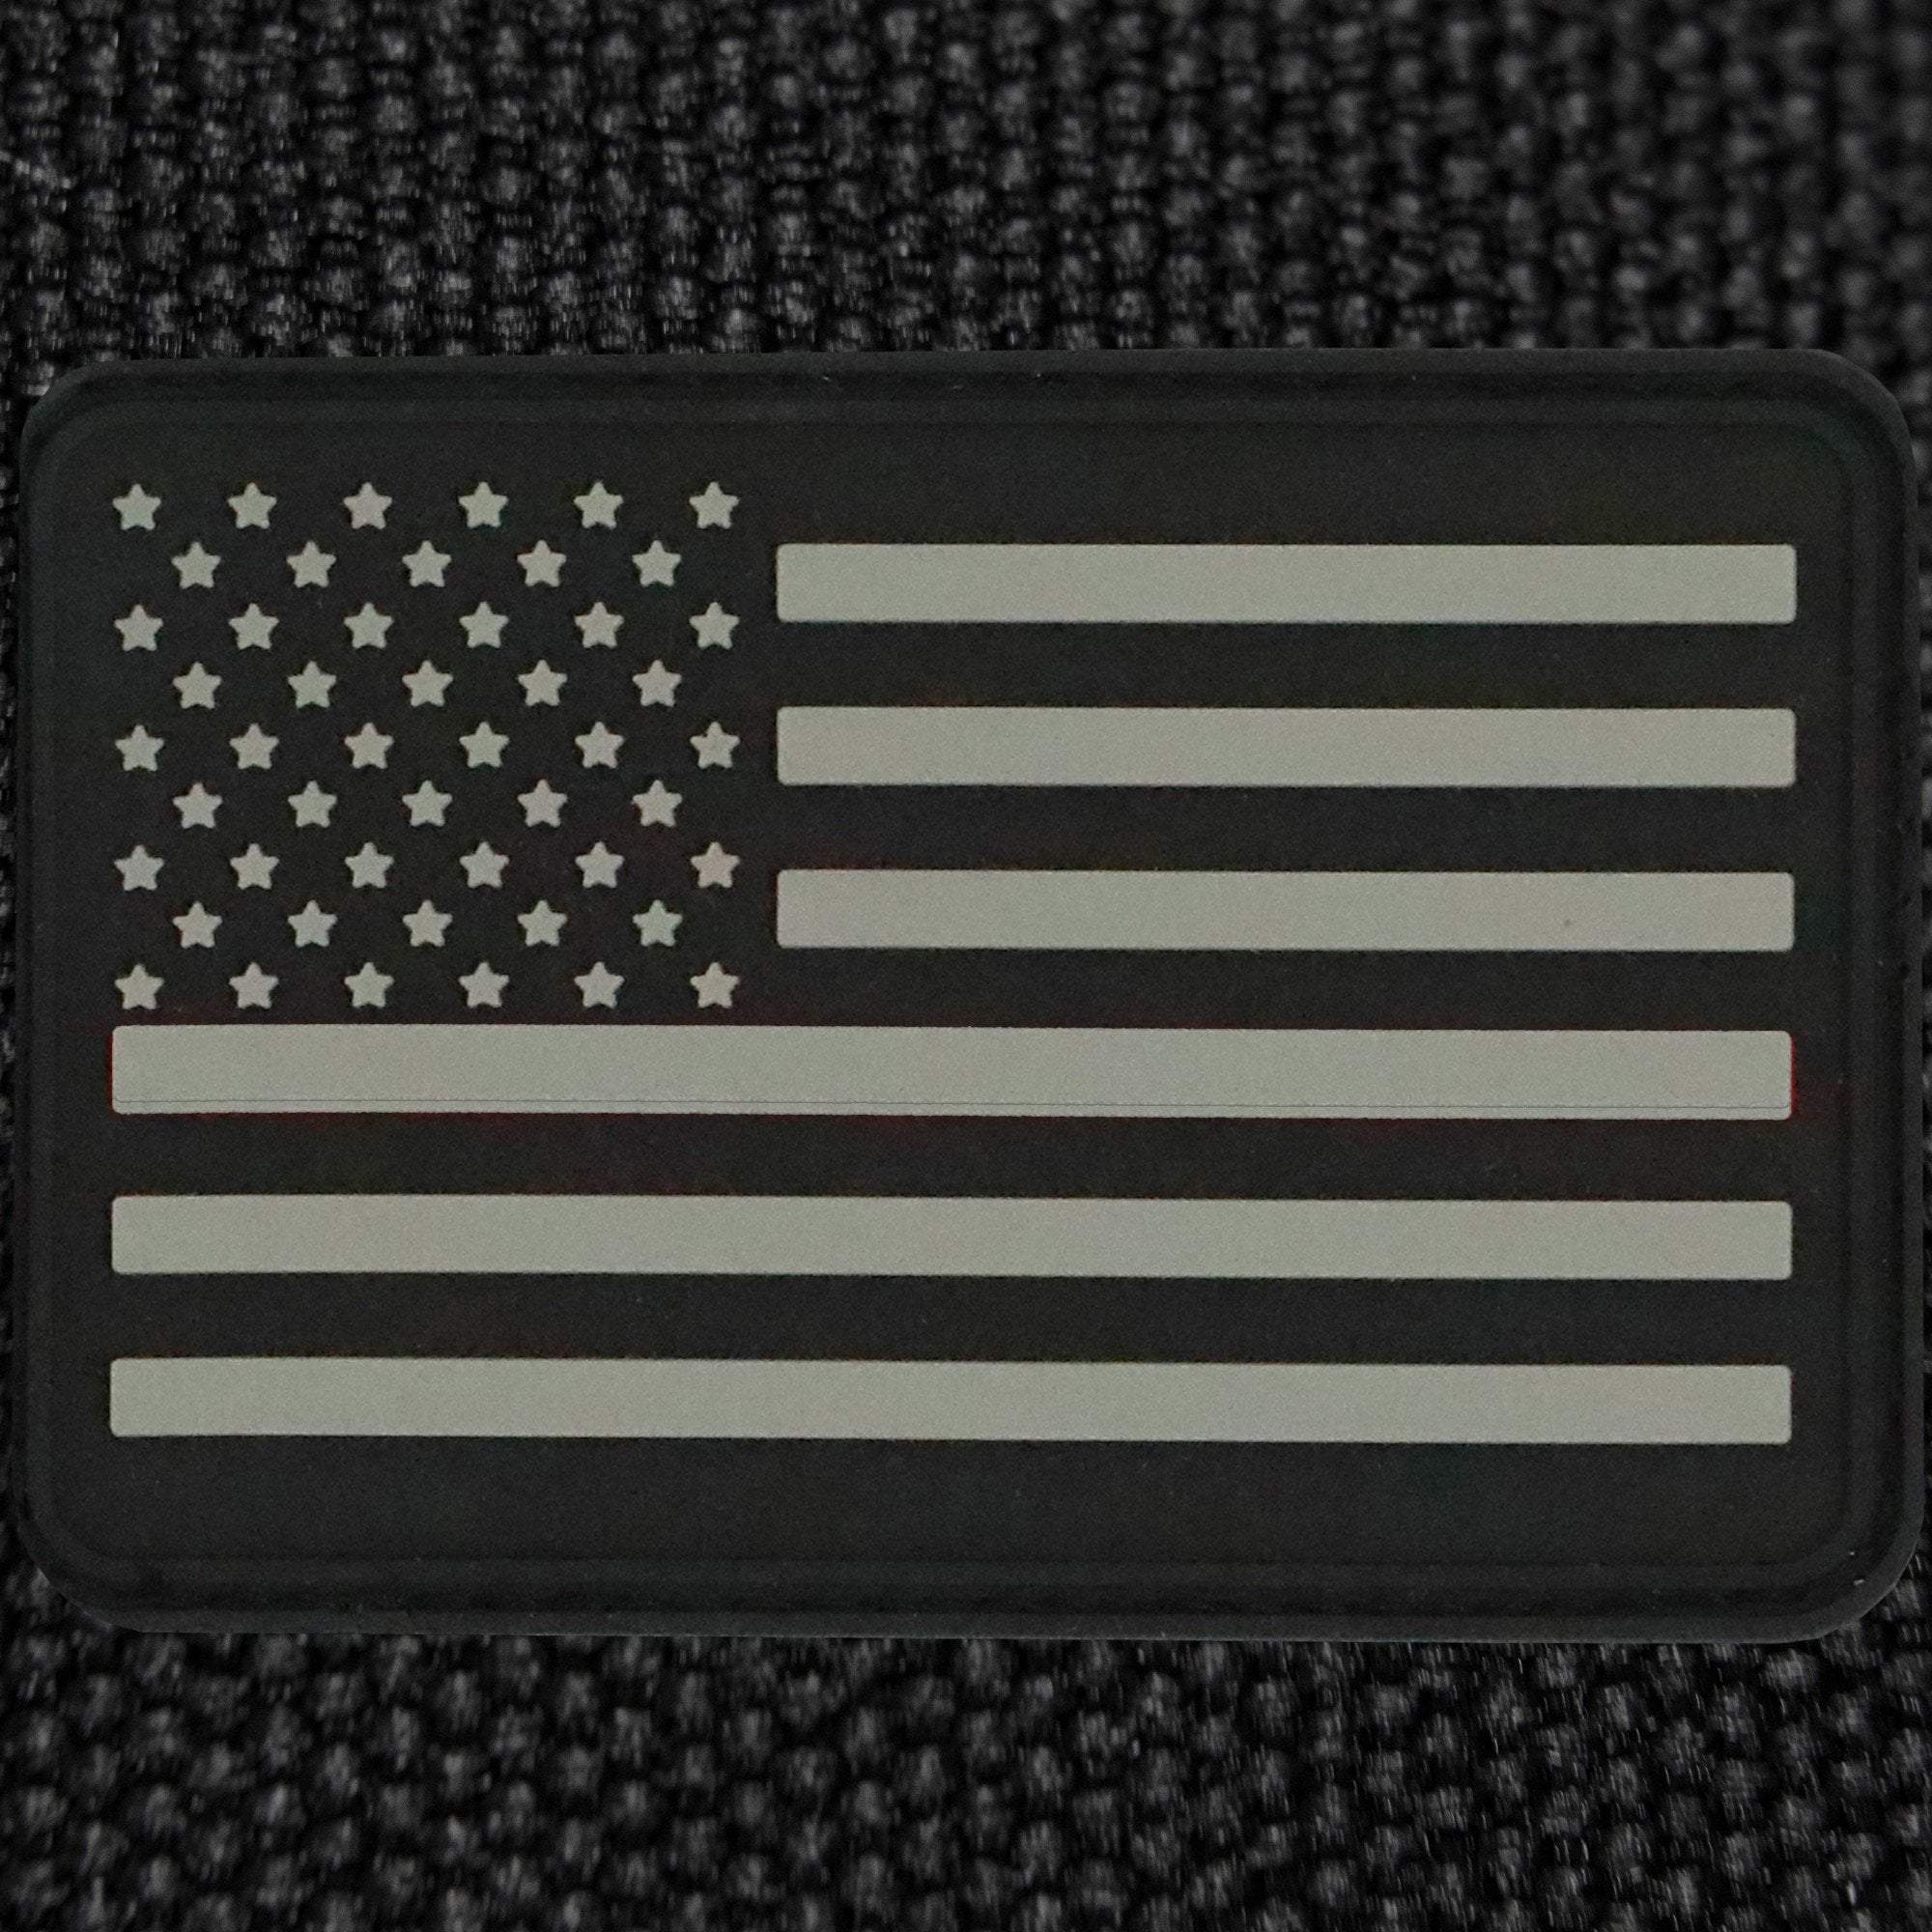 American Flag Patch PVC Rubber w/ Color options - USA Flag Patch, Thin Blue Line Patch, Thin Red Line Patch 2 inch x 3 inch w/ Velcro/Hook Backing